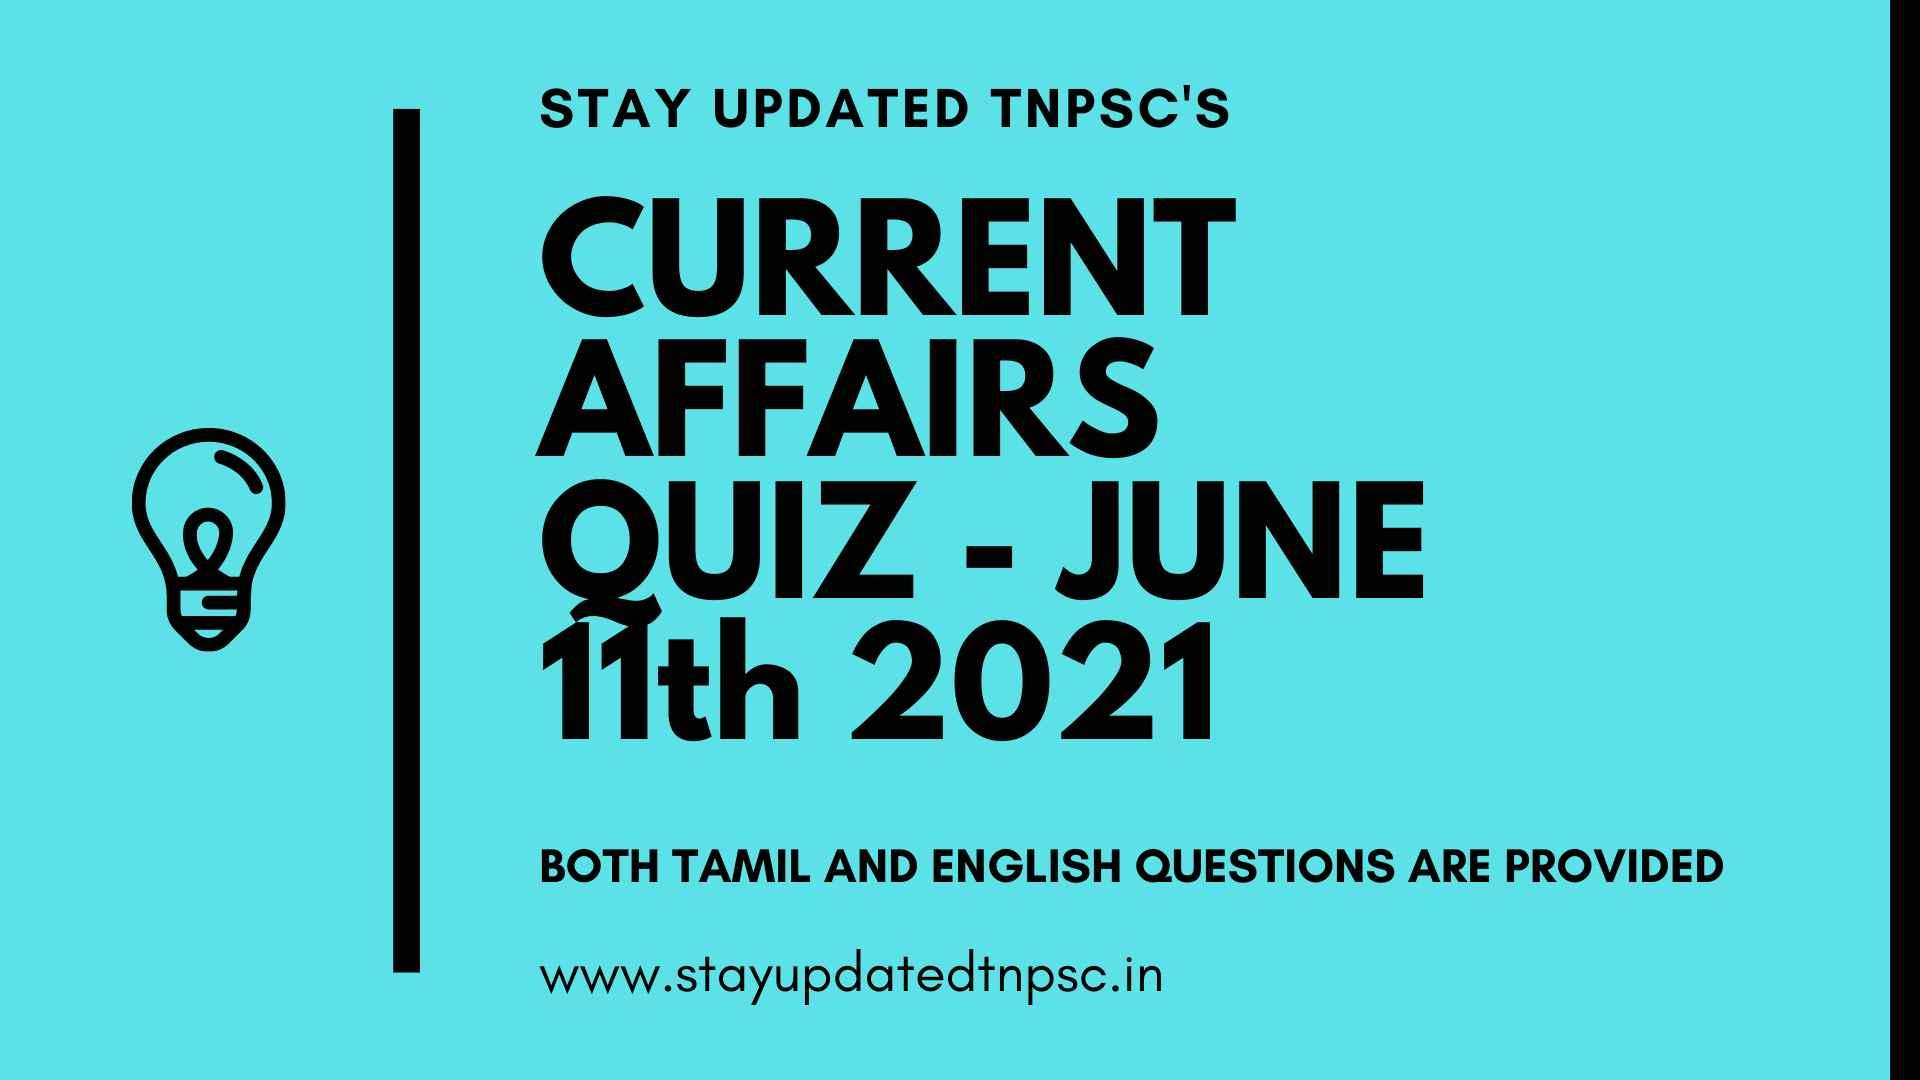 TNPSC DAILY CURRENT AFFAIRS: 11 JUNE 2021